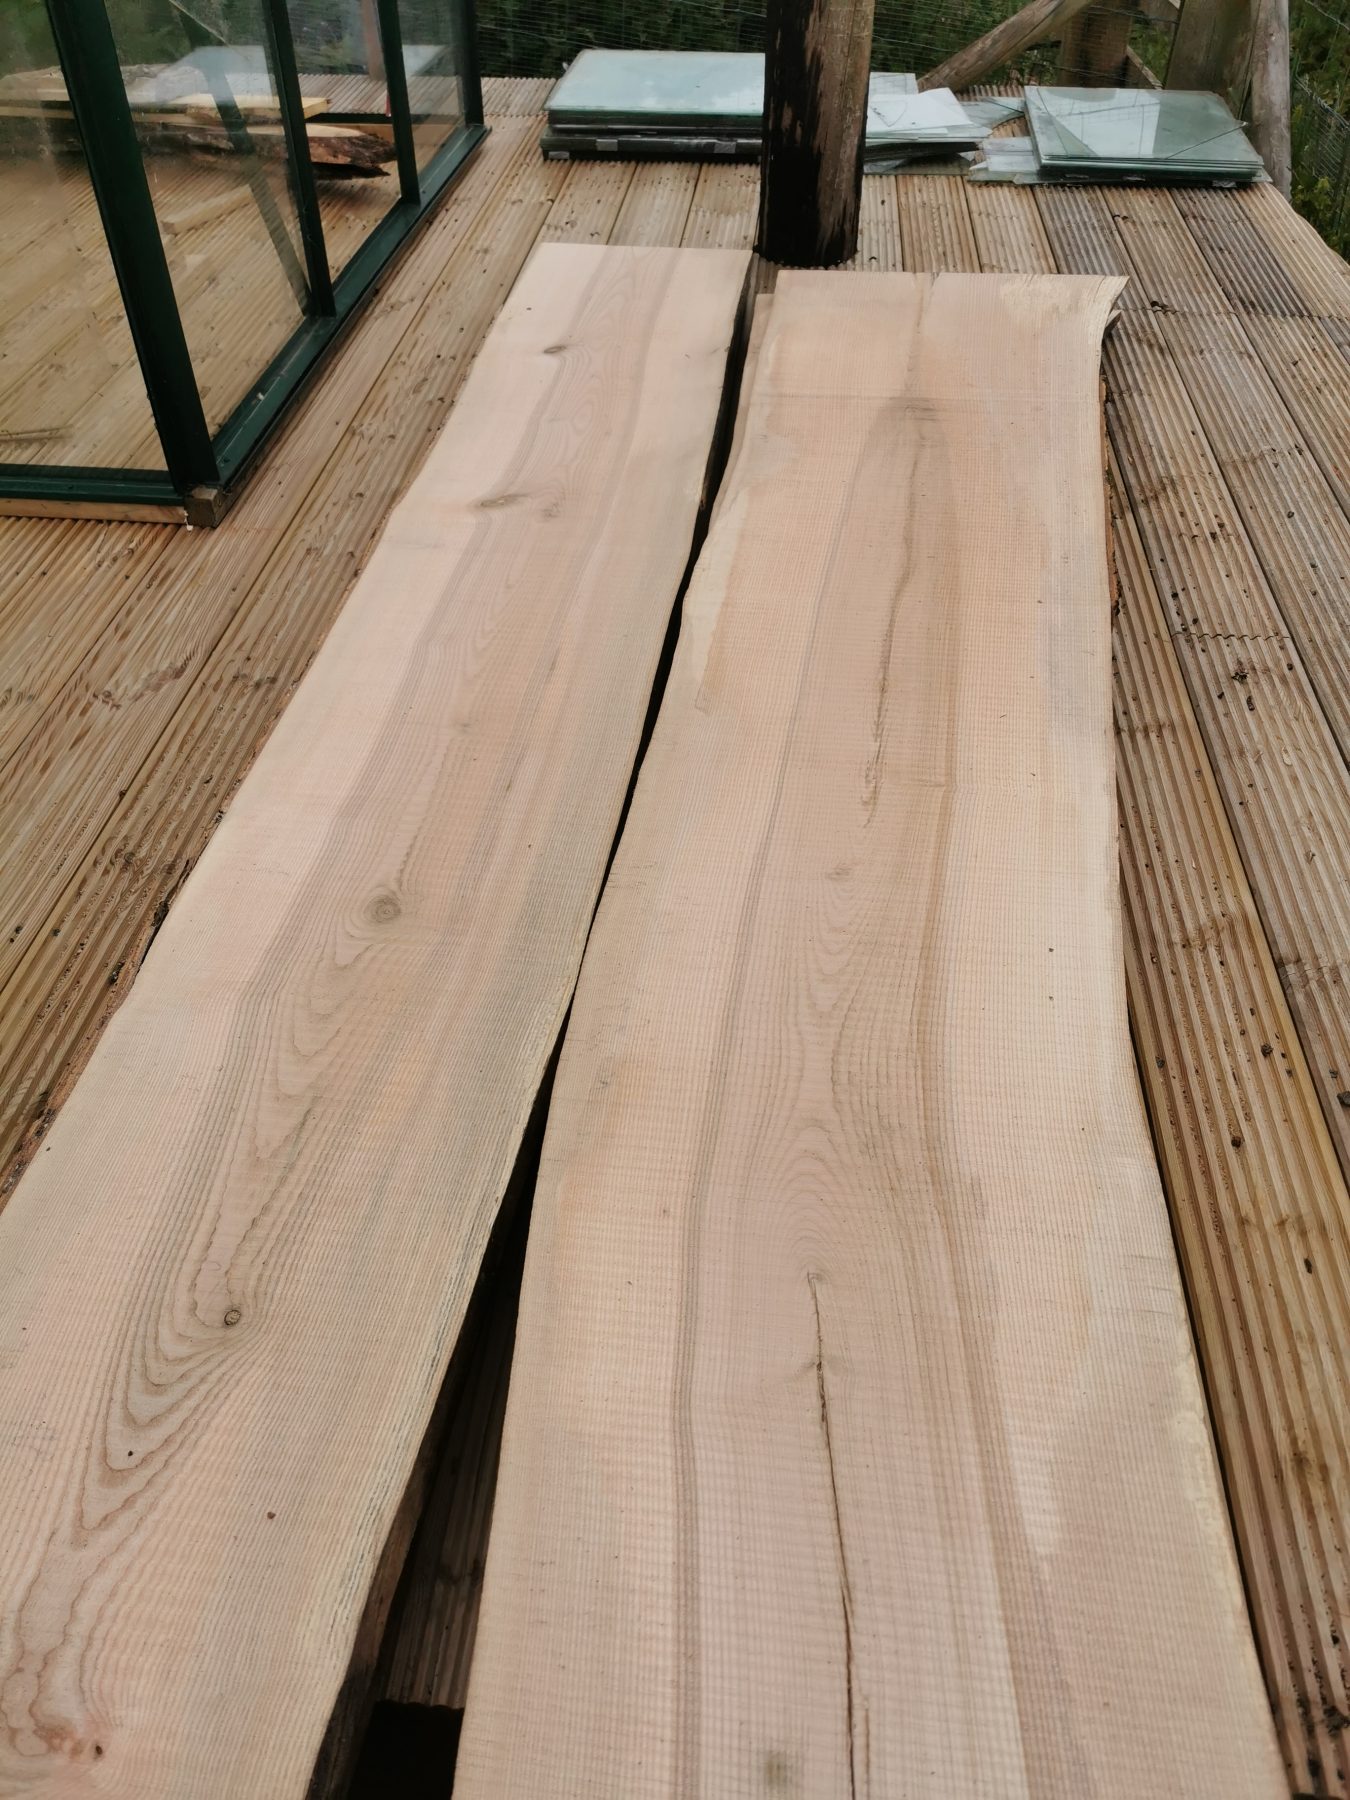 Milled timber boards